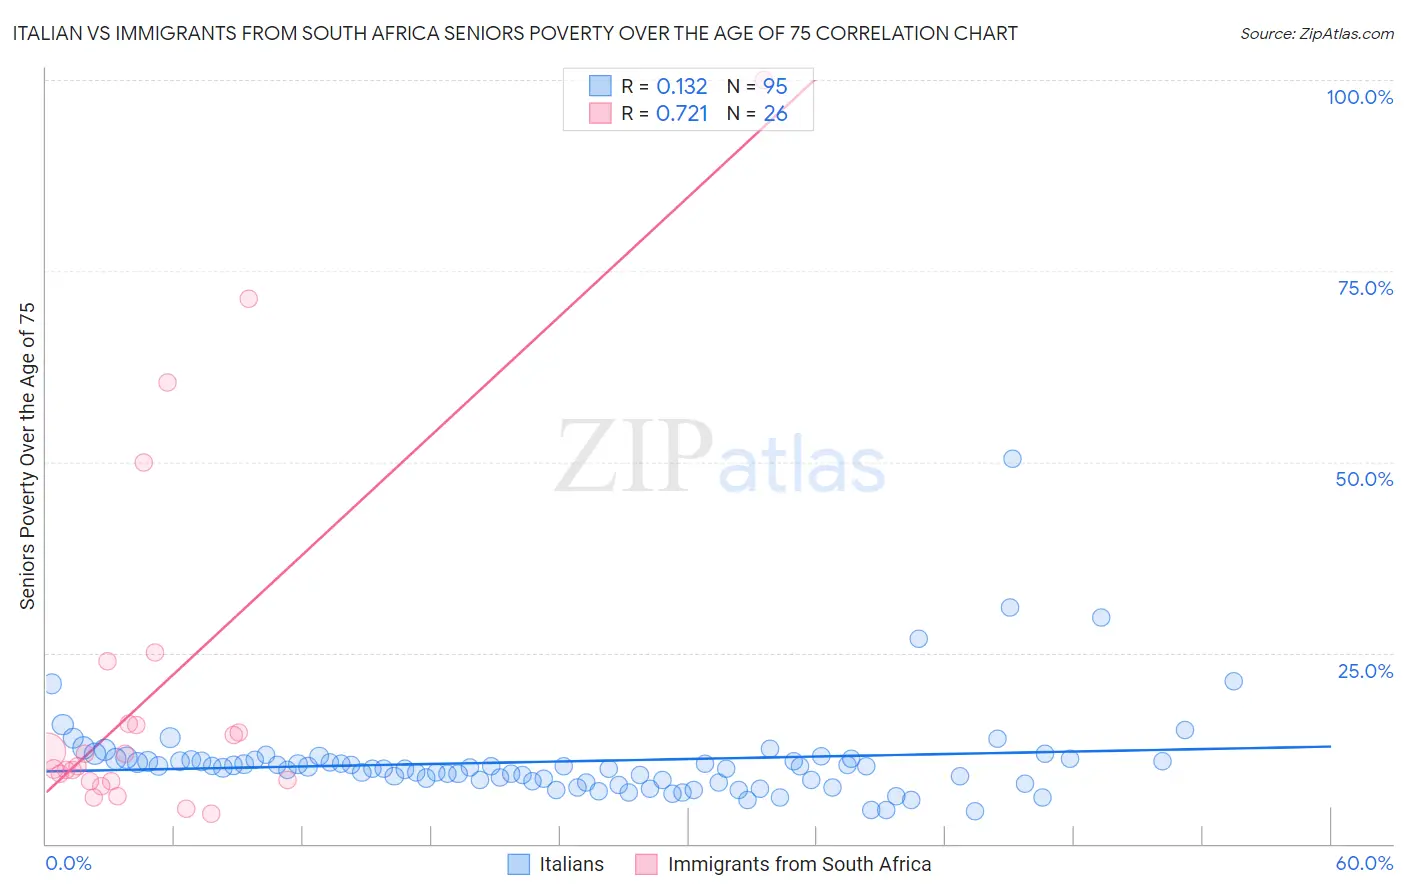 Italian vs Immigrants from South Africa Seniors Poverty Over the Age of 75